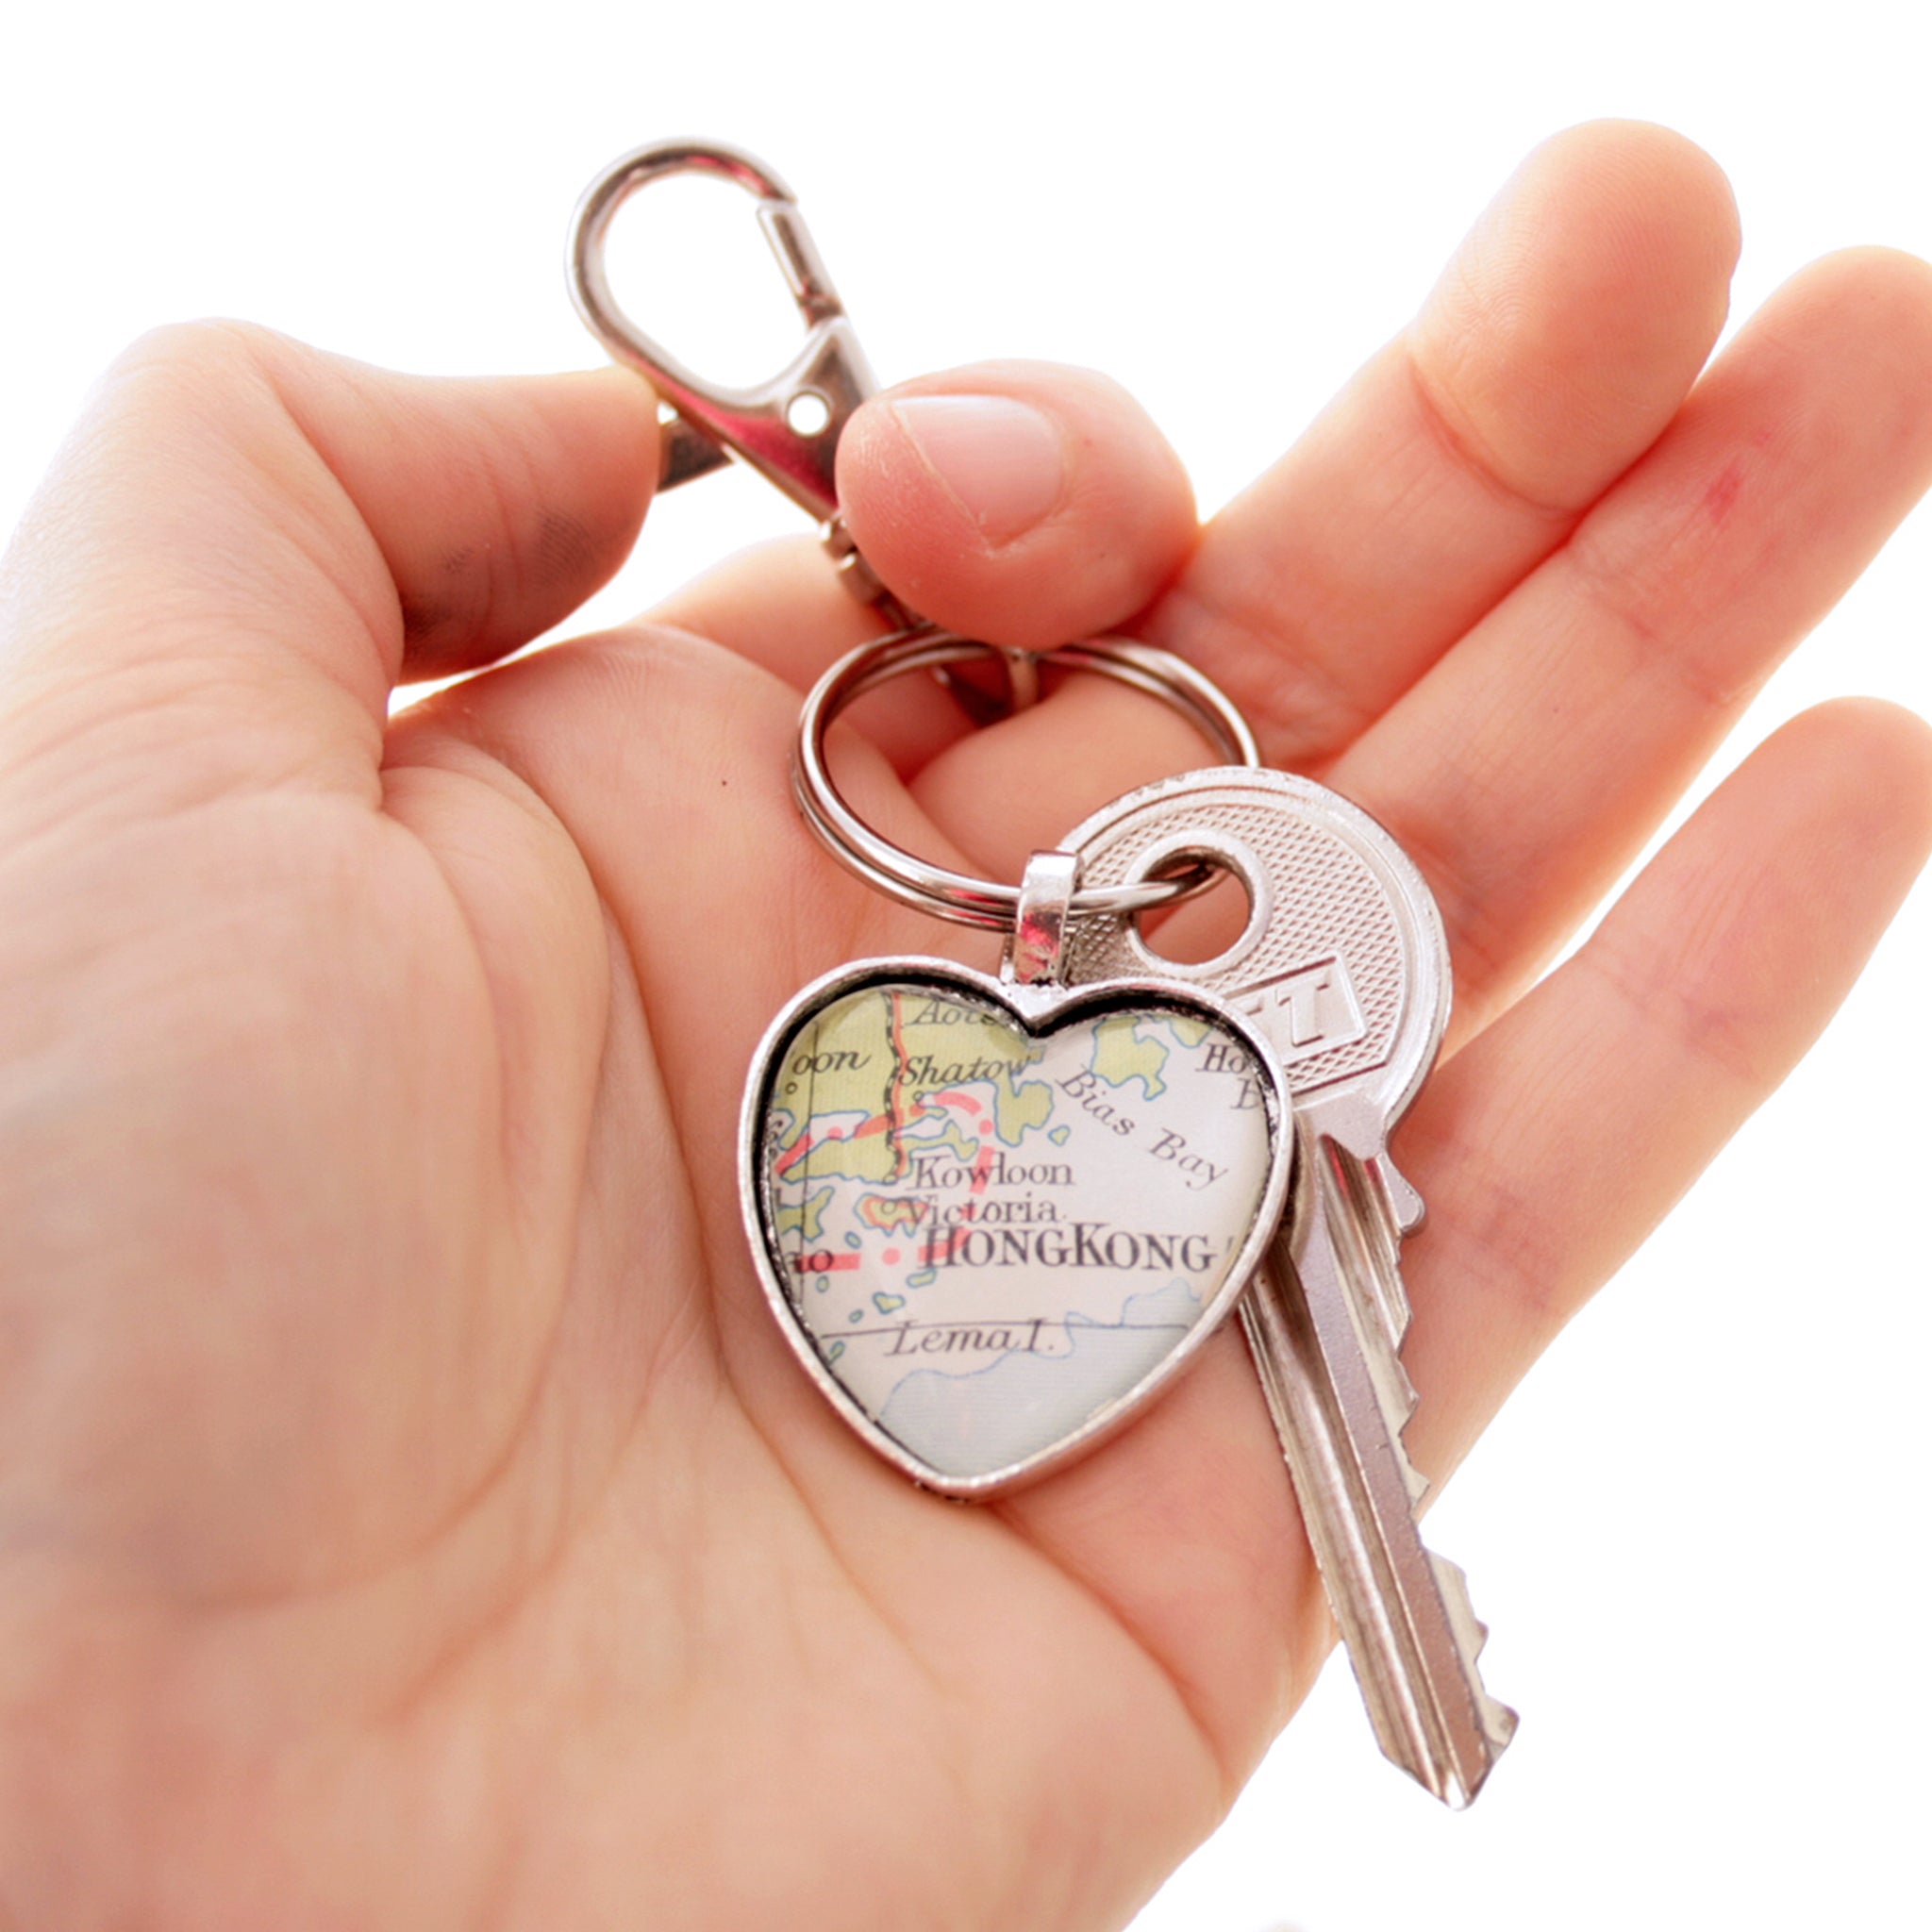 Hold in hand Heart shaped keychain in silver tone featuring map of Hong Kong